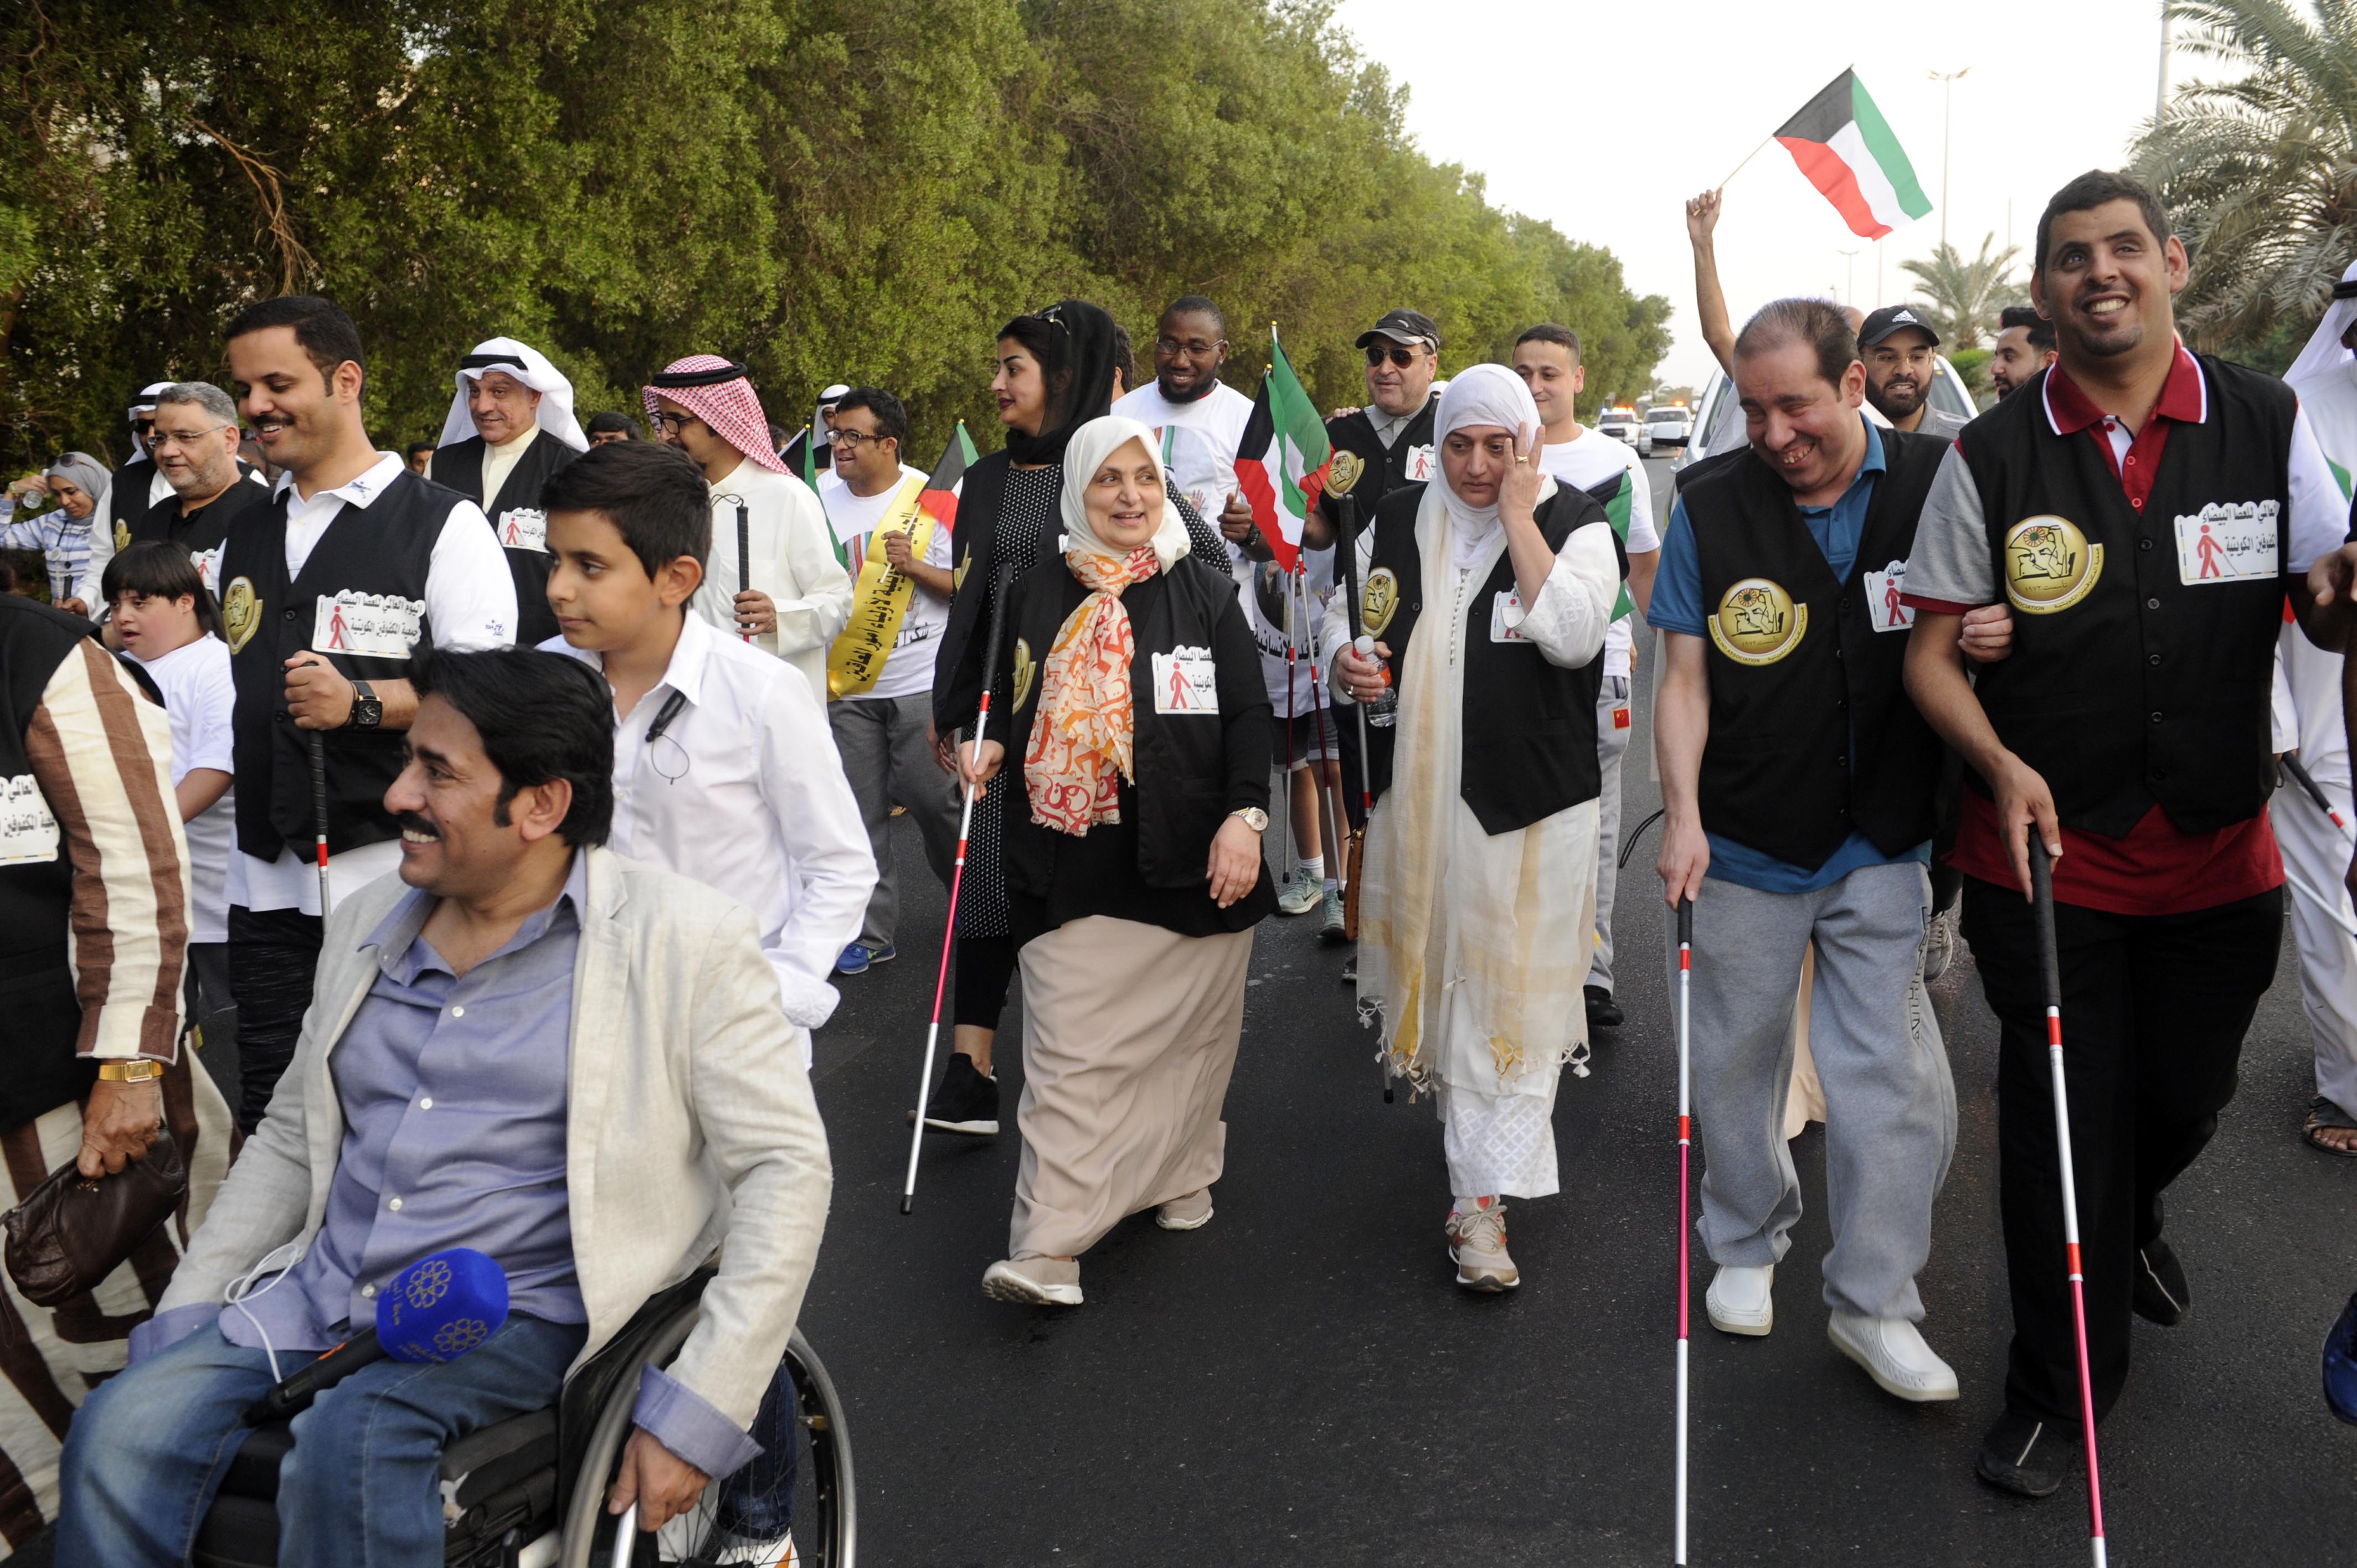 Kuwait's Minister of Social Affairs and Labor Hind Al-Sabeeh during sponsoring a marathon organized by the society to mark the world White Cane Day